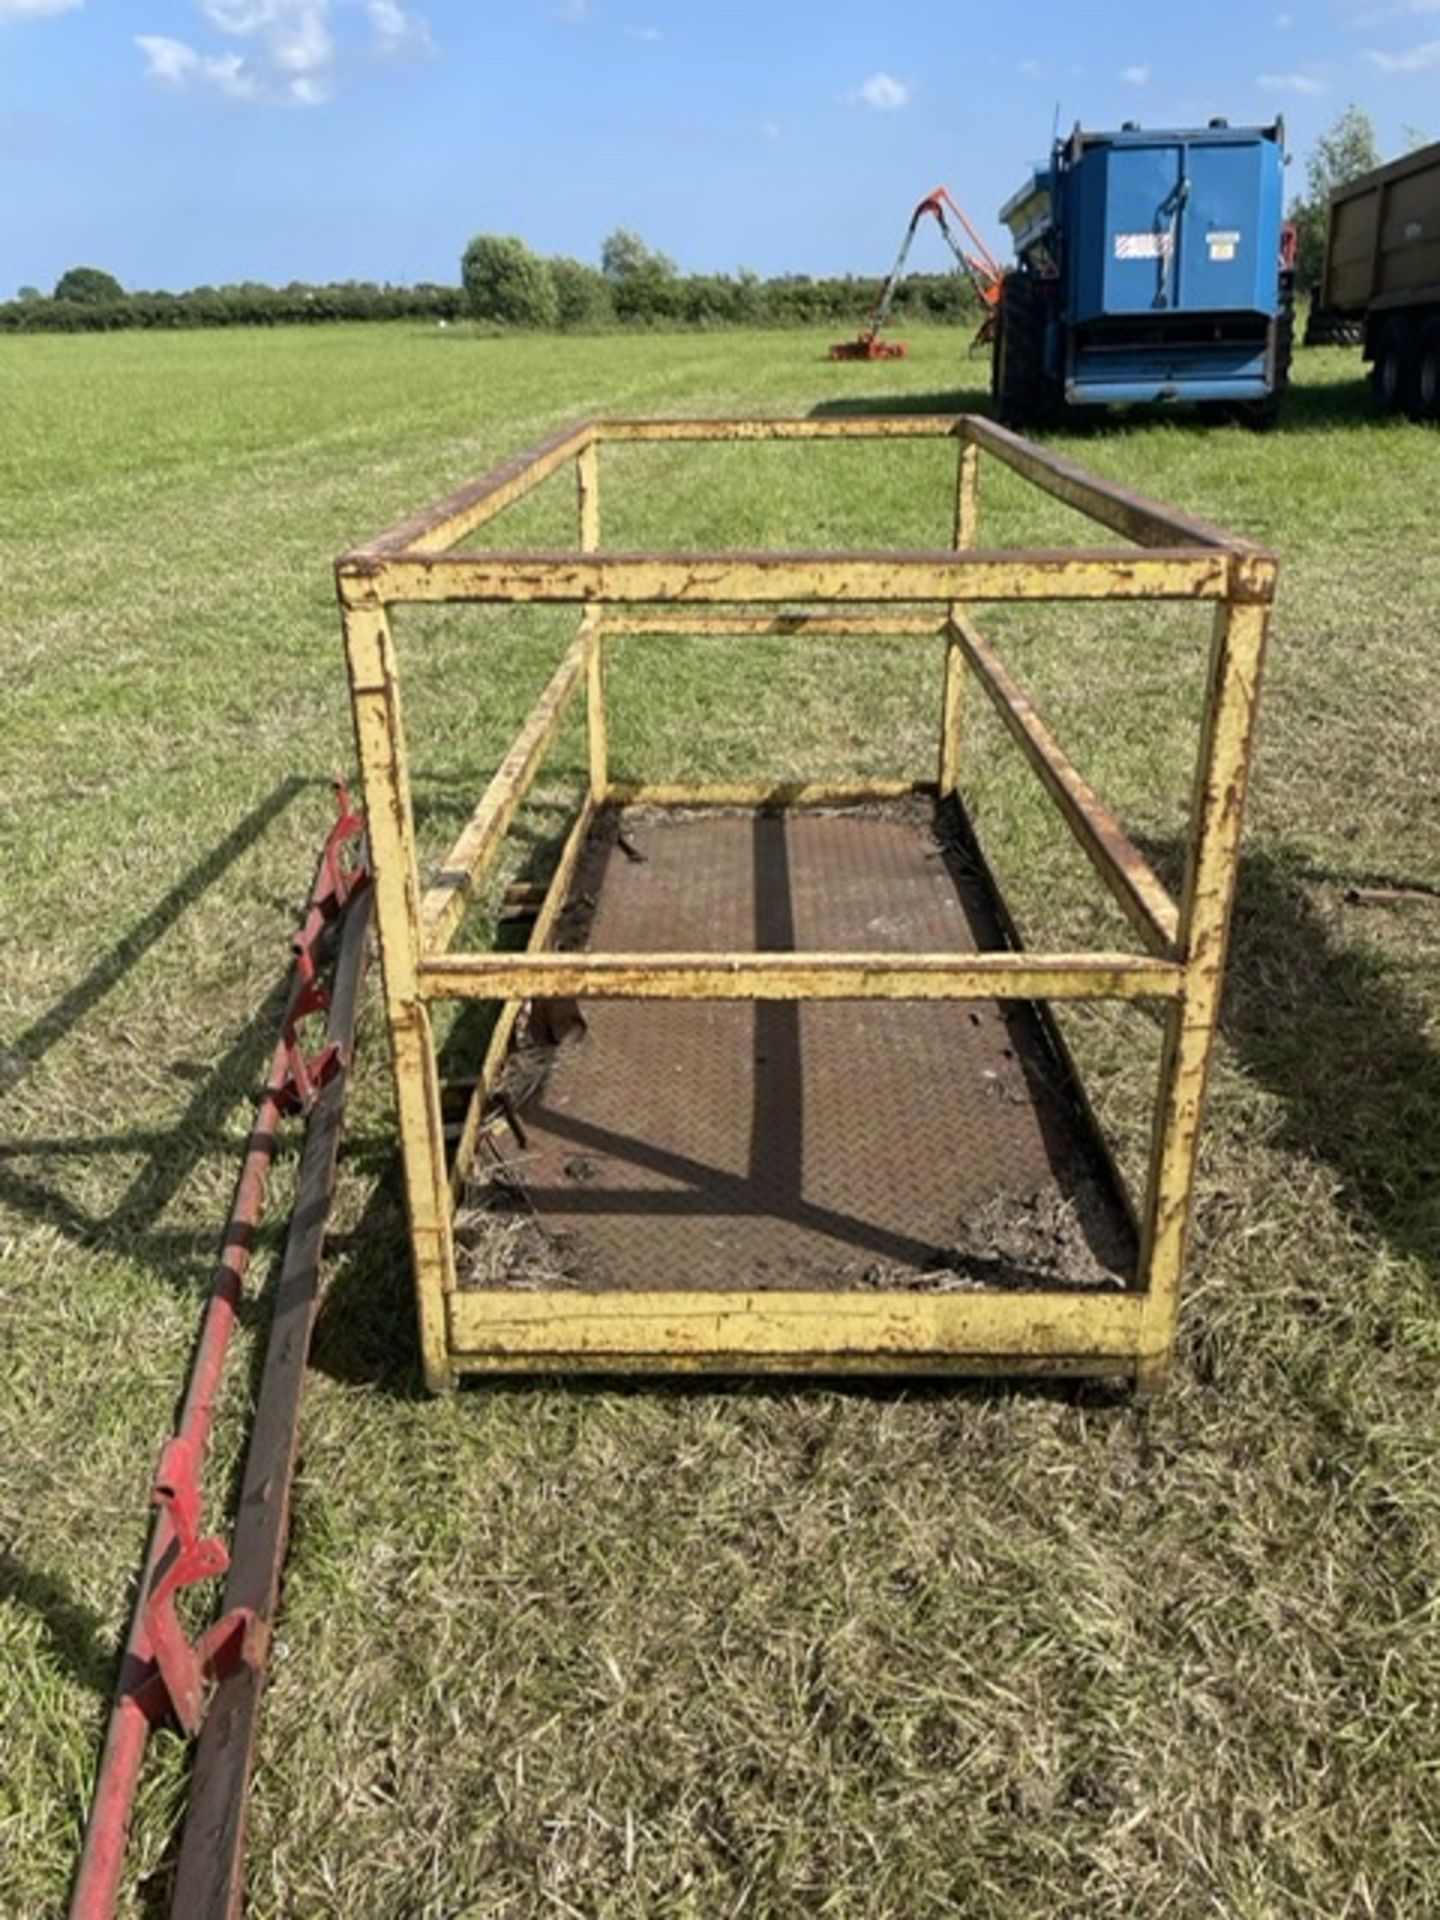 Homemade Personnel Cage - Image 2 of 3